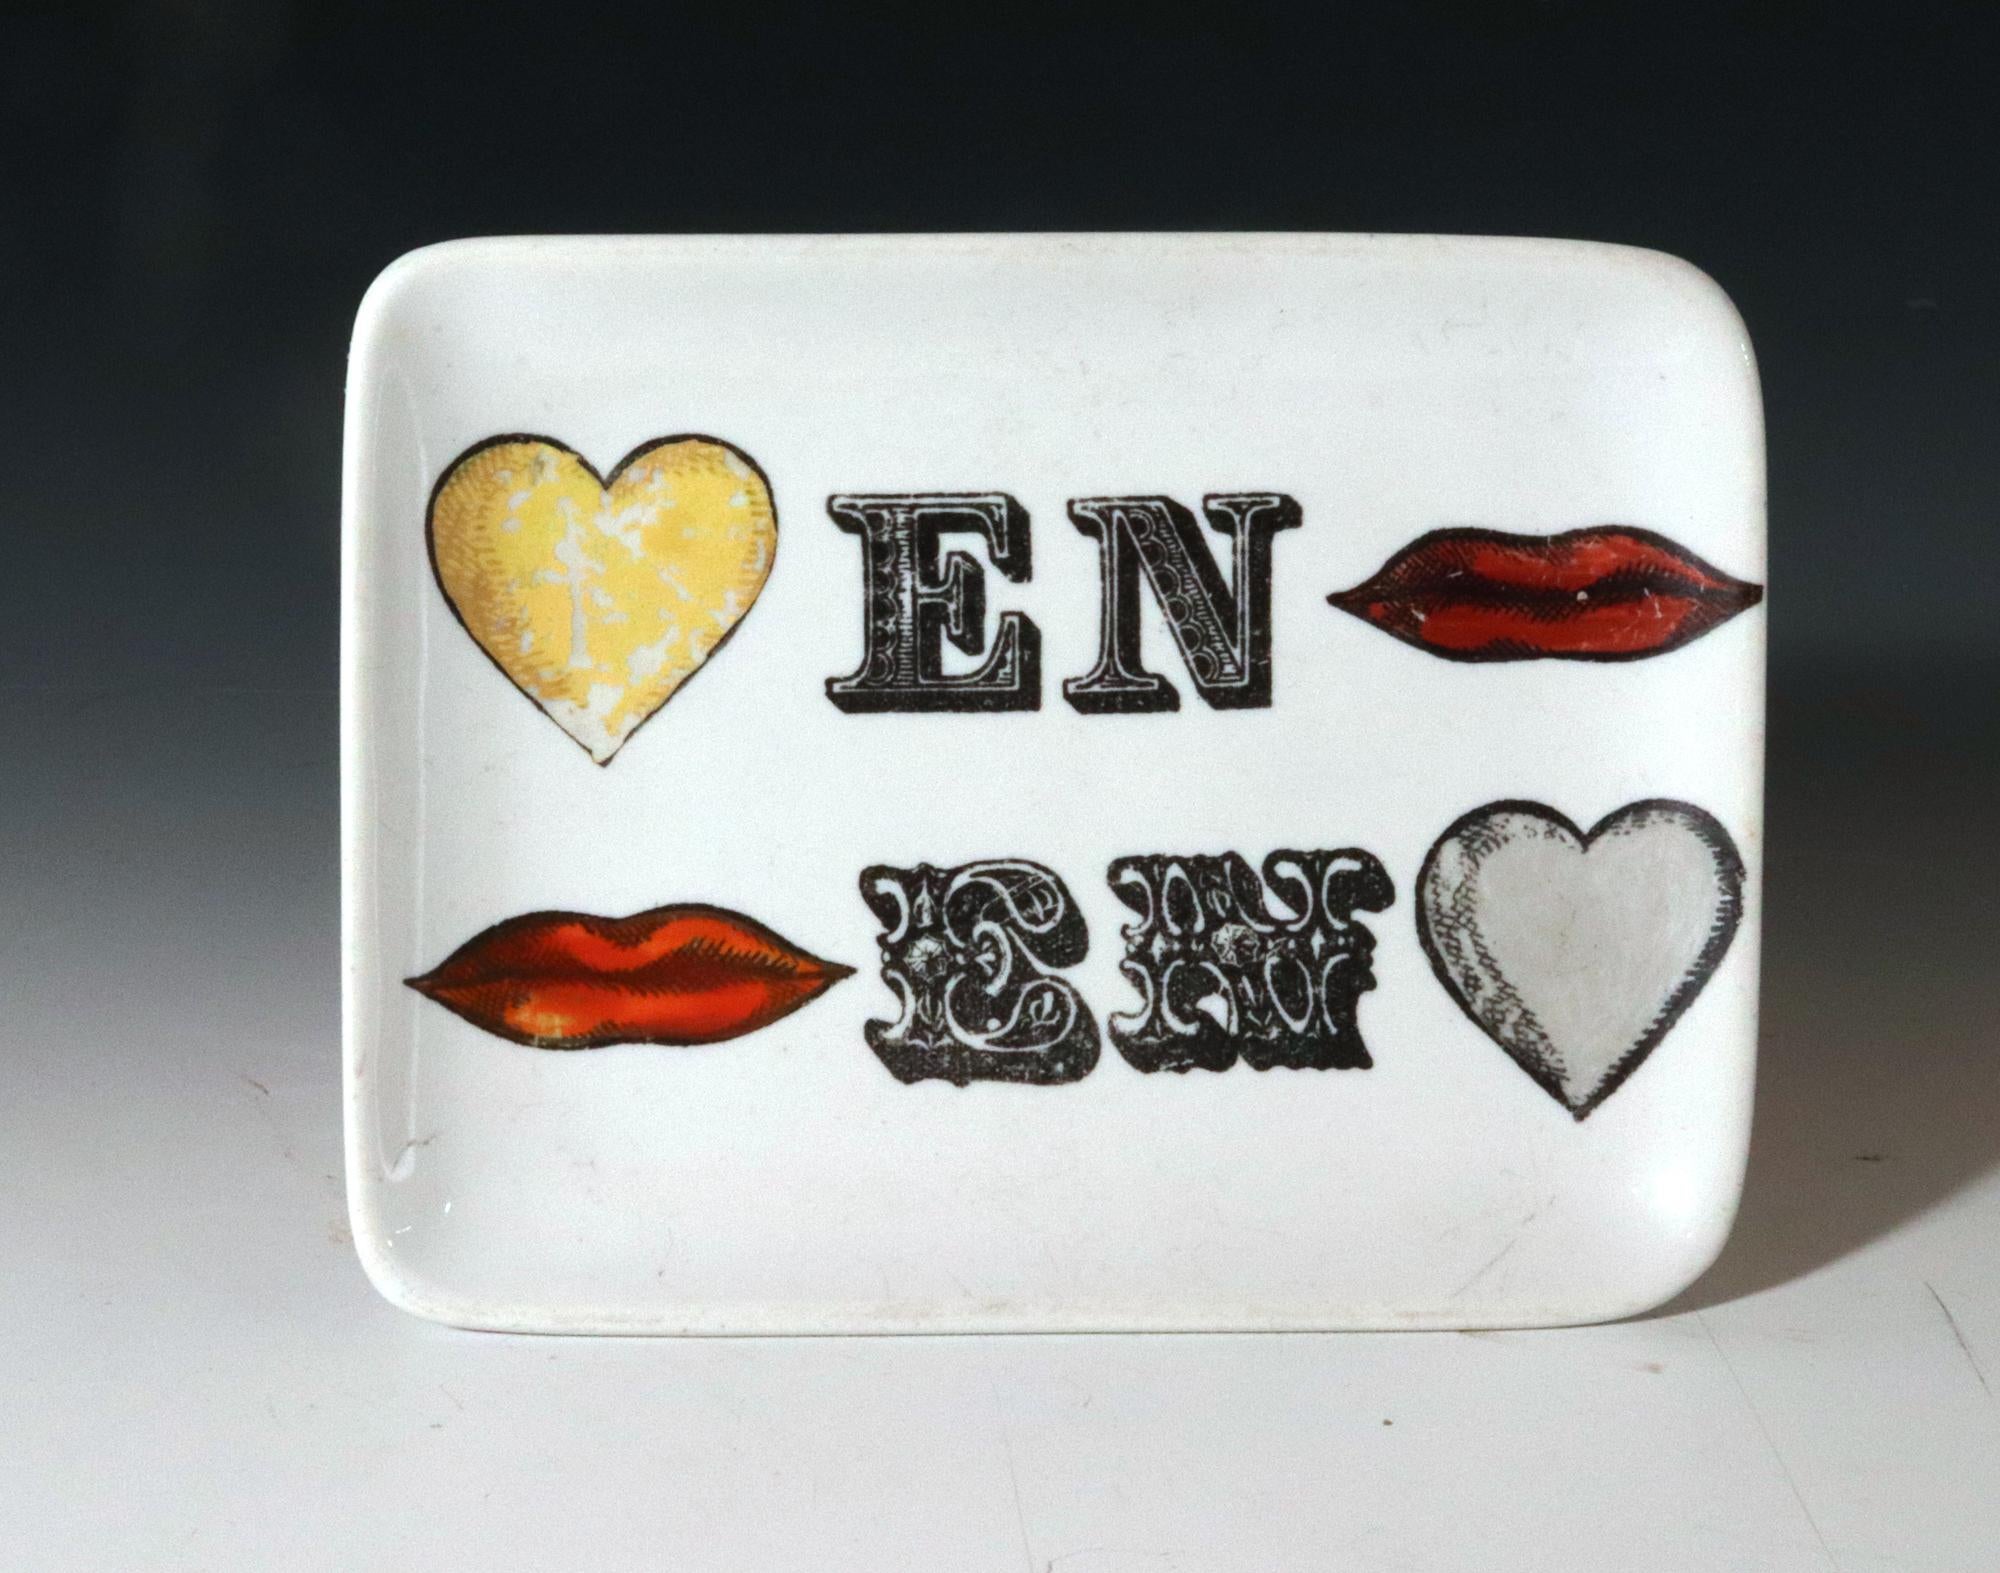 Piero Fornasetti Ceramic Pin Tray or Ashtray,
1950s-60s,

This rectangular ceramic tray features raised sides and a playful design by Piero Fornasetti. Two contrasting hearts, one yellow and one gray, are positioned in diagonally opposite corners.